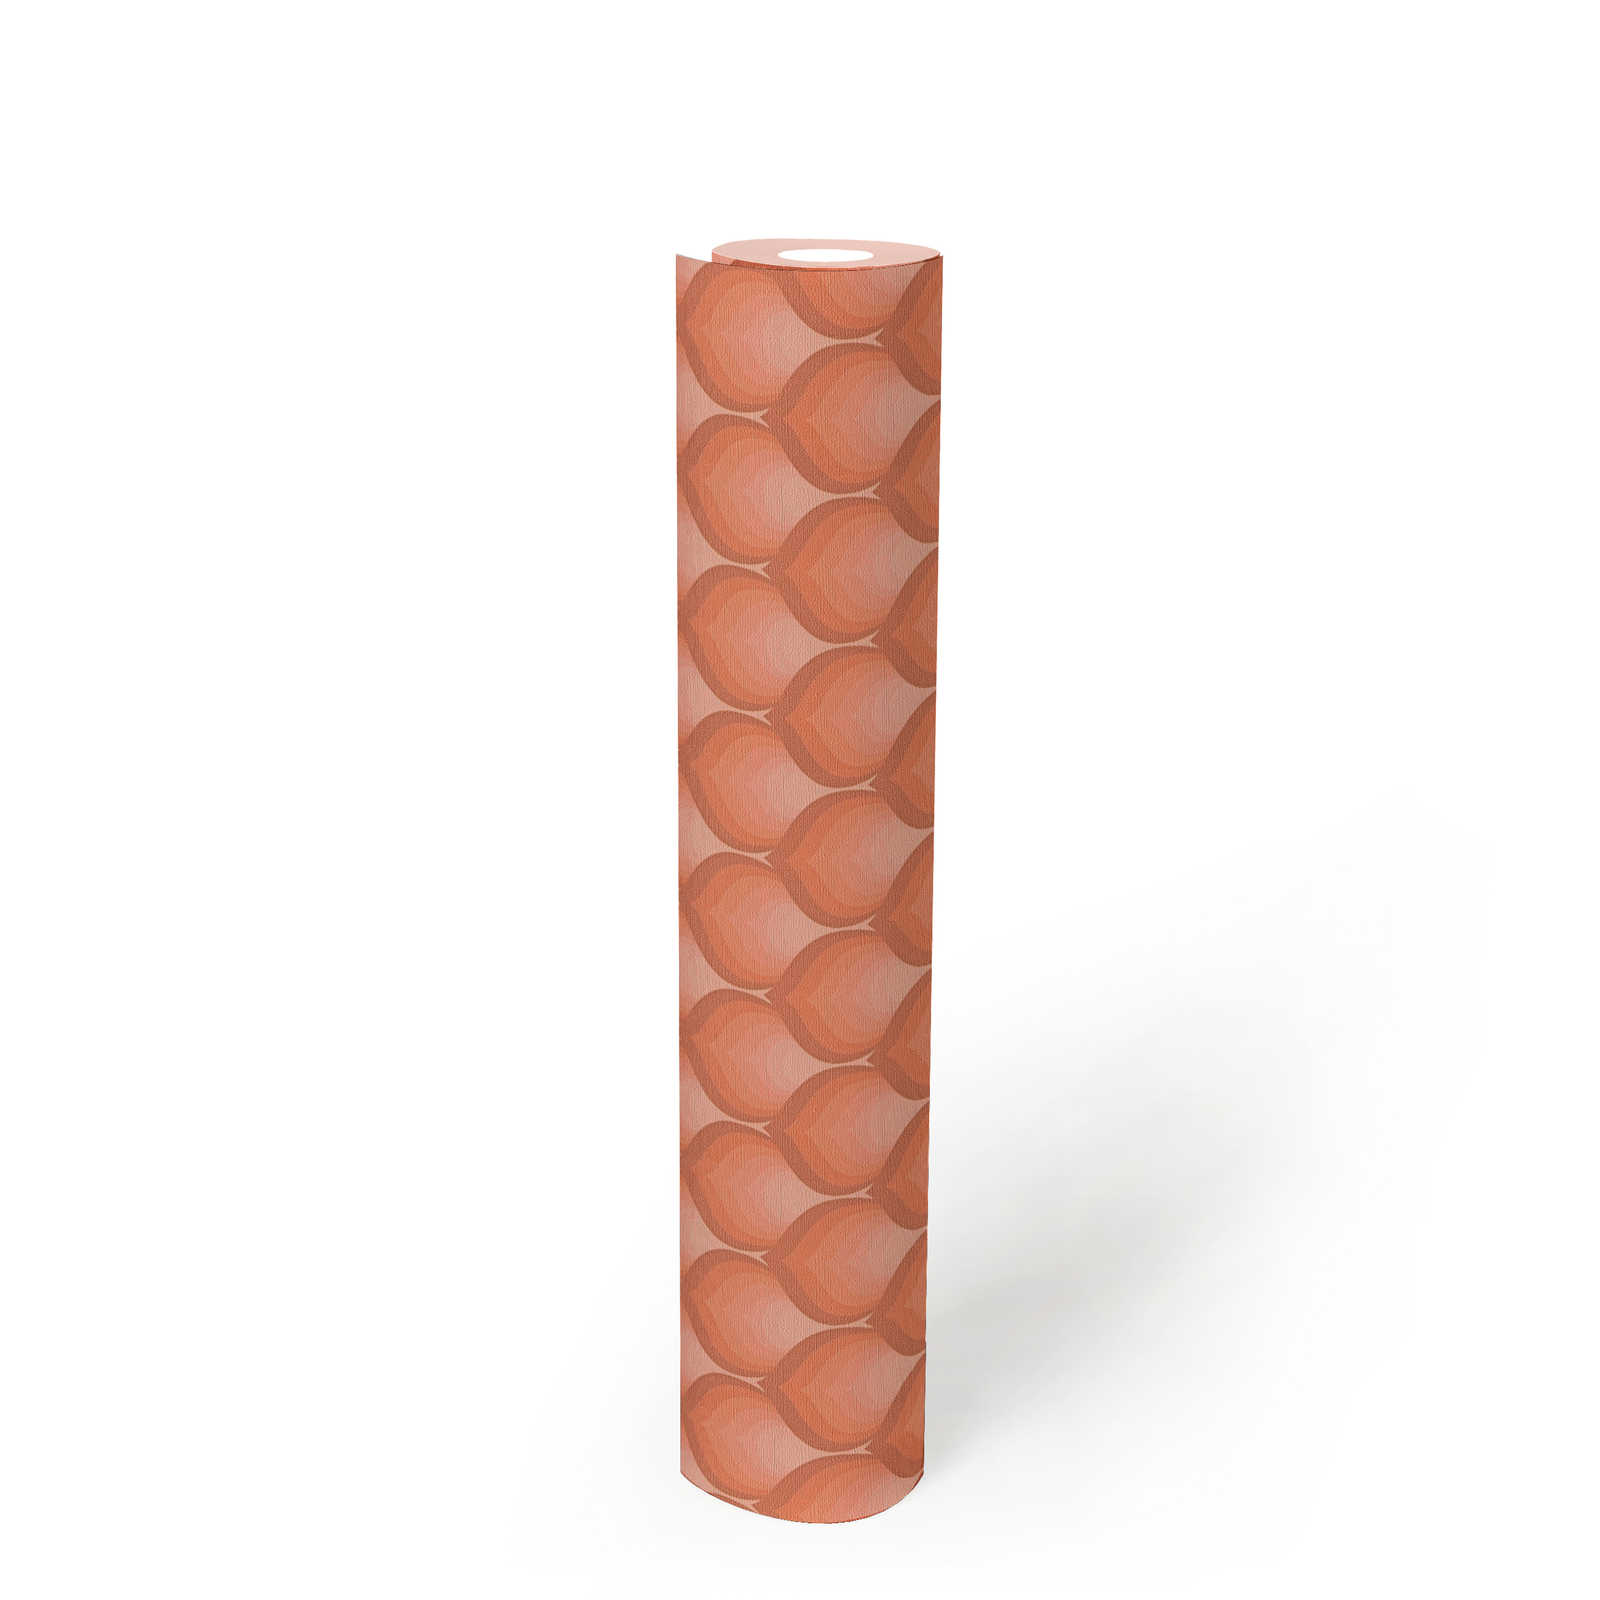             Retro non-woven wallpaper with scale pattern in warm colours - orange, red, pink
        